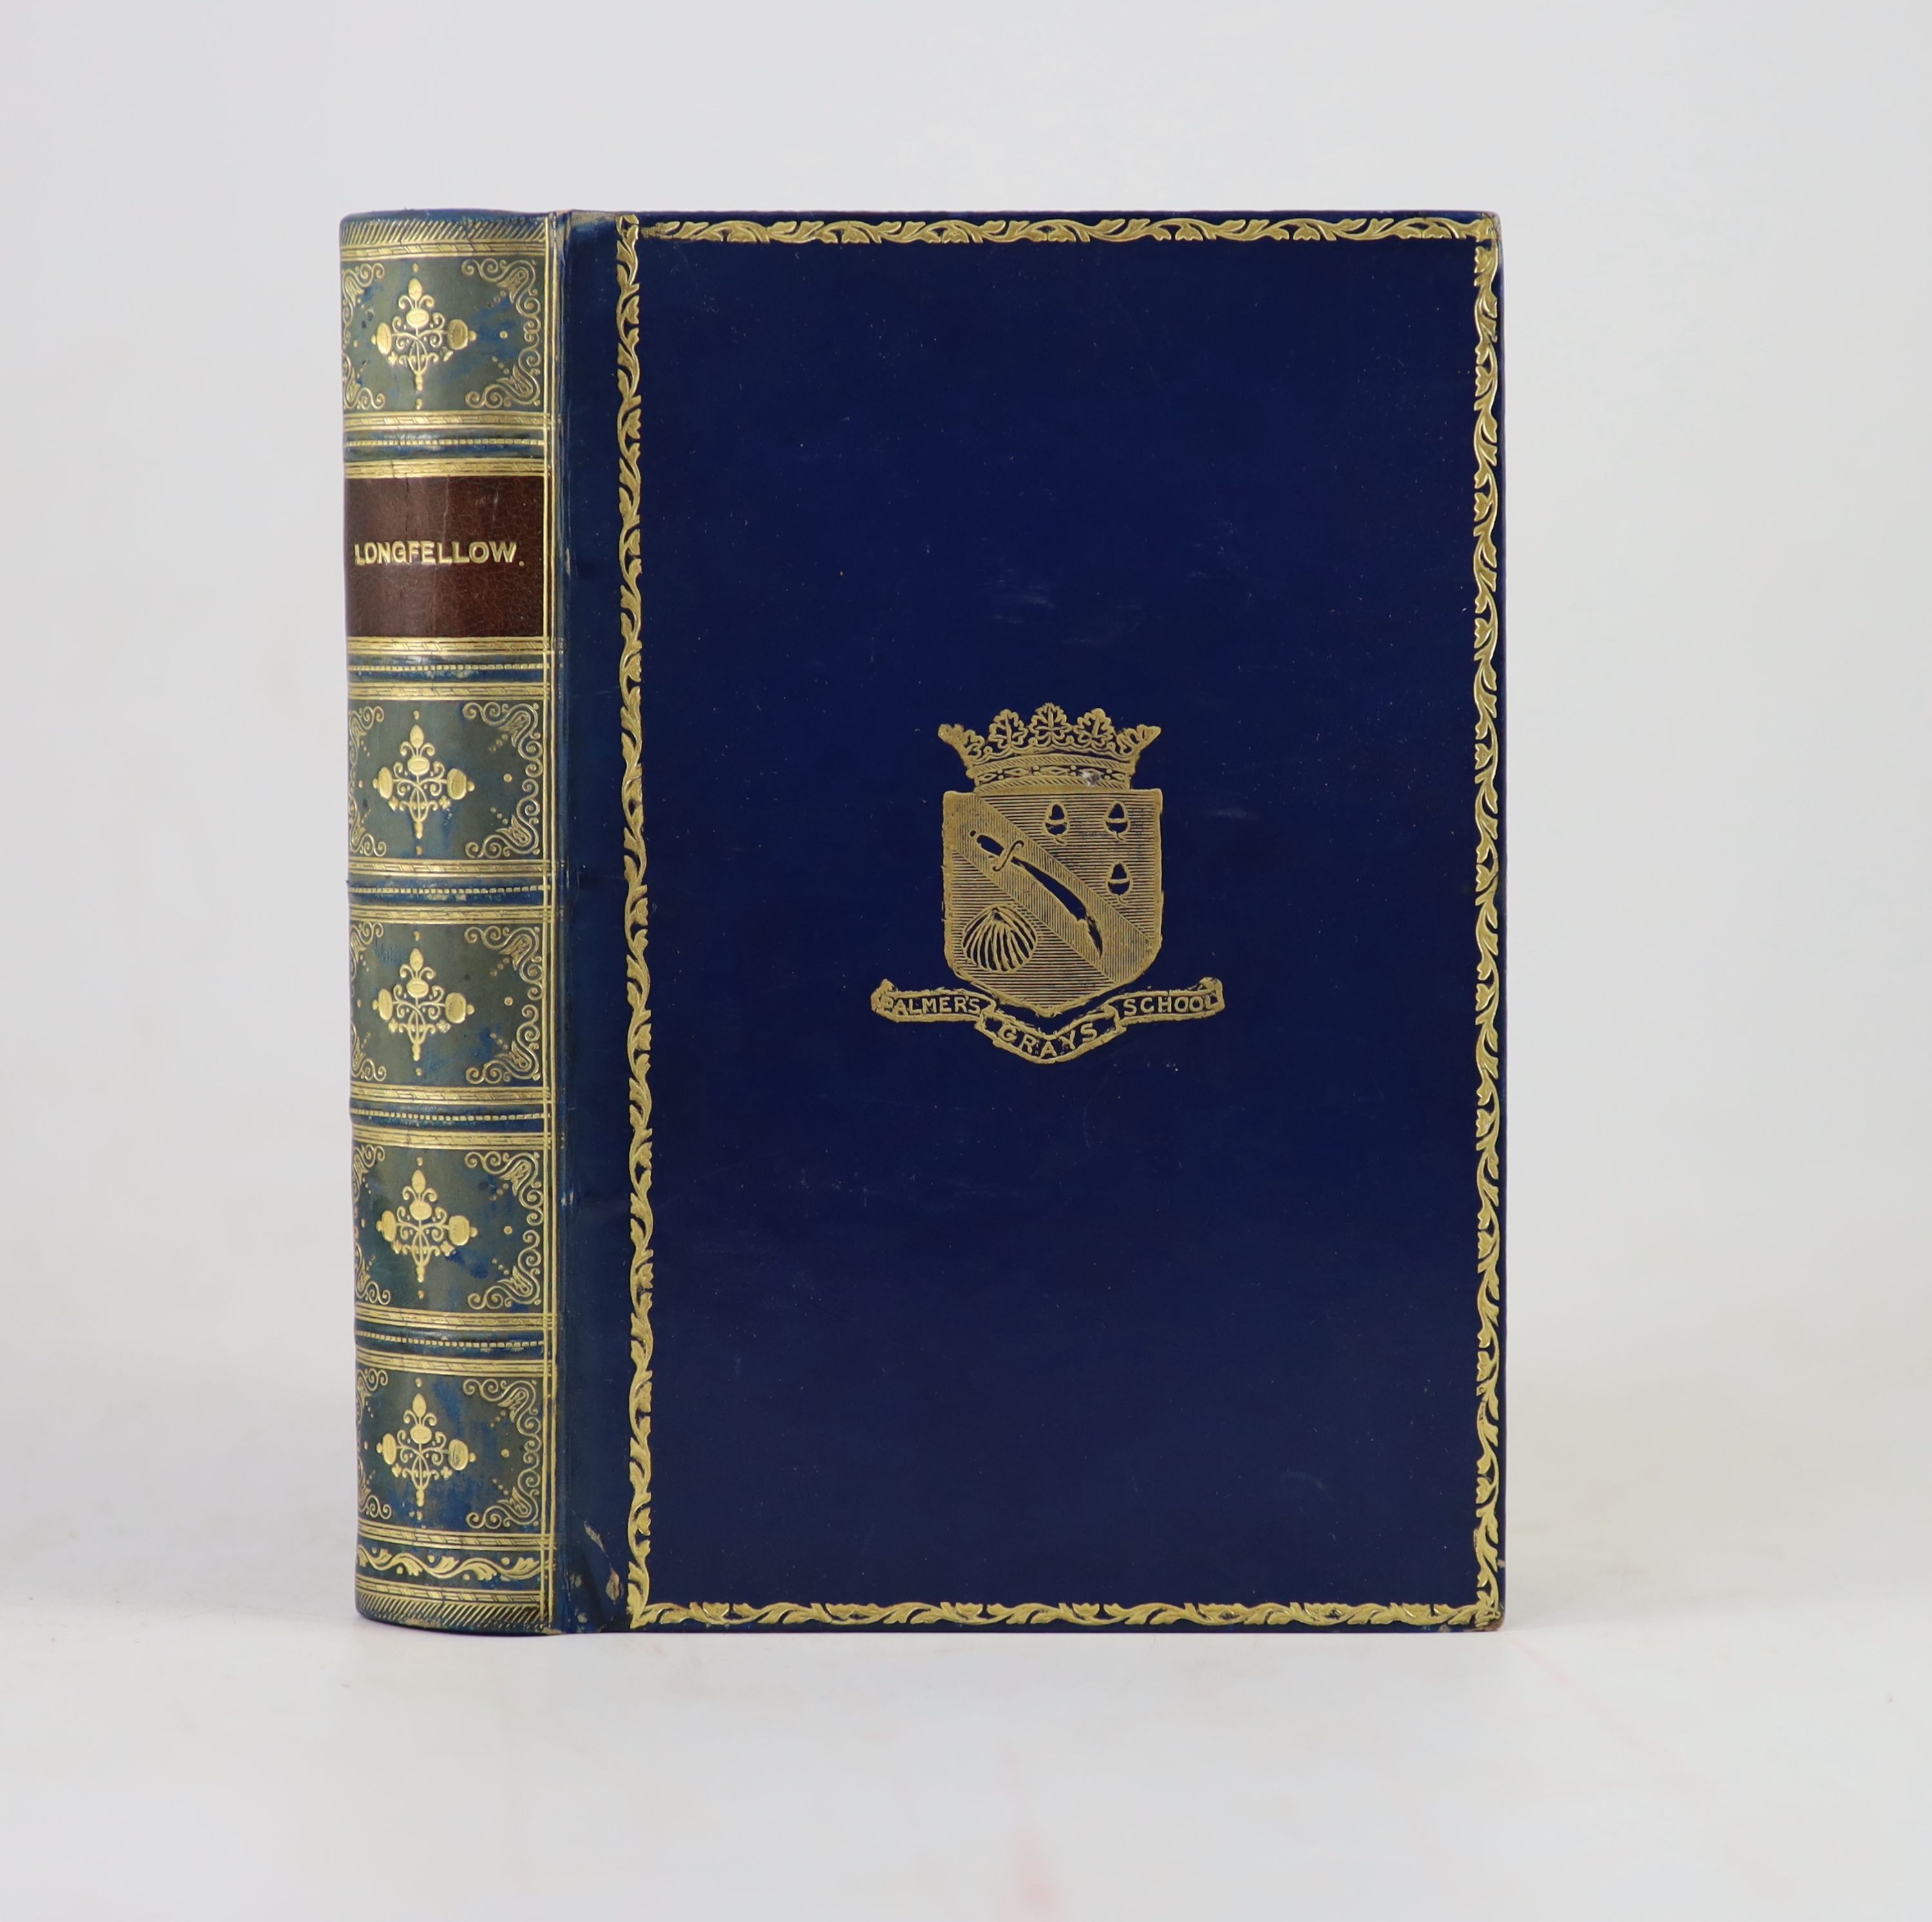 Longfellow, Henry Wadsworth - The Poetical Works of Henry Wadsworth Longfellow. Complete copyright edition, Gilt tooled morocco with school crest to upper, panelled and gilt decorated spine with morocco label. Marbled ed